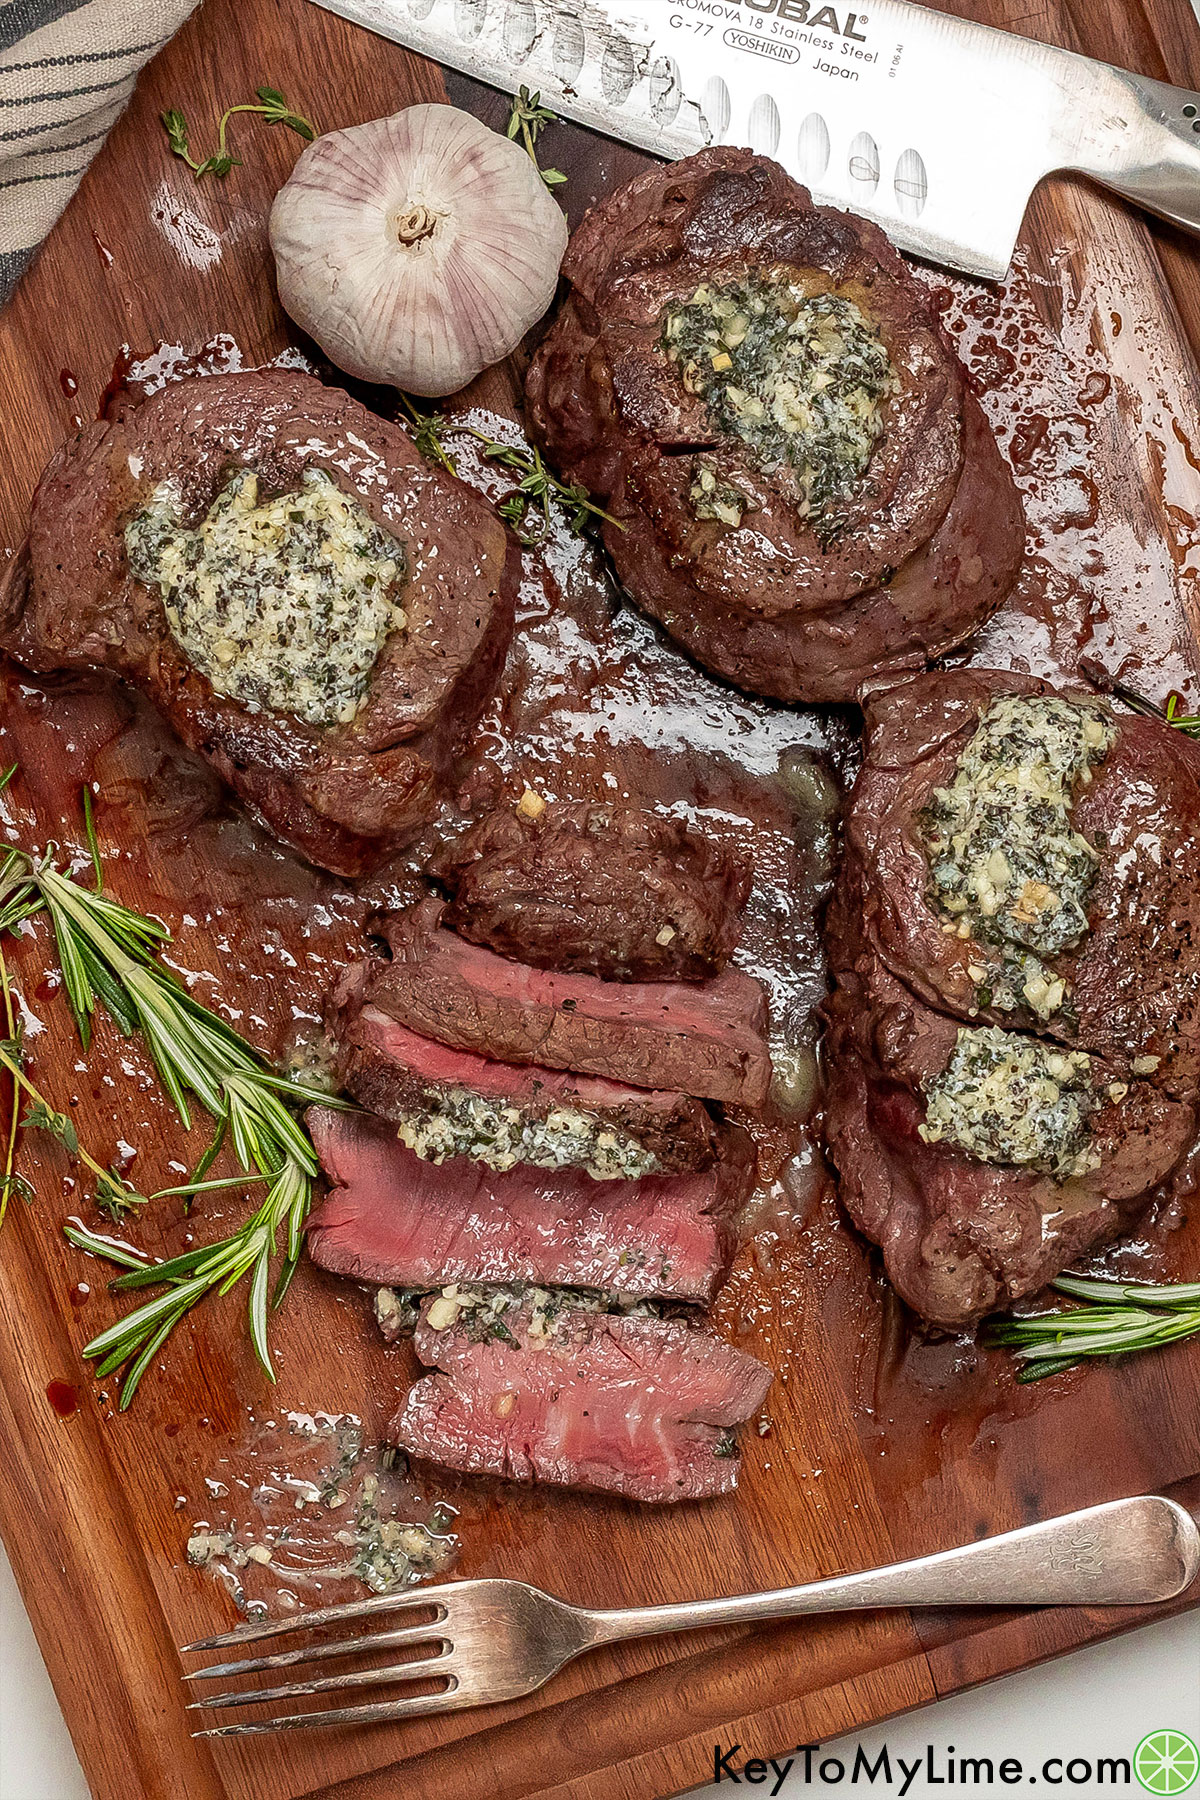 Whole and sliced filet mignon topped with garlic butter on a dark wood cutting board.